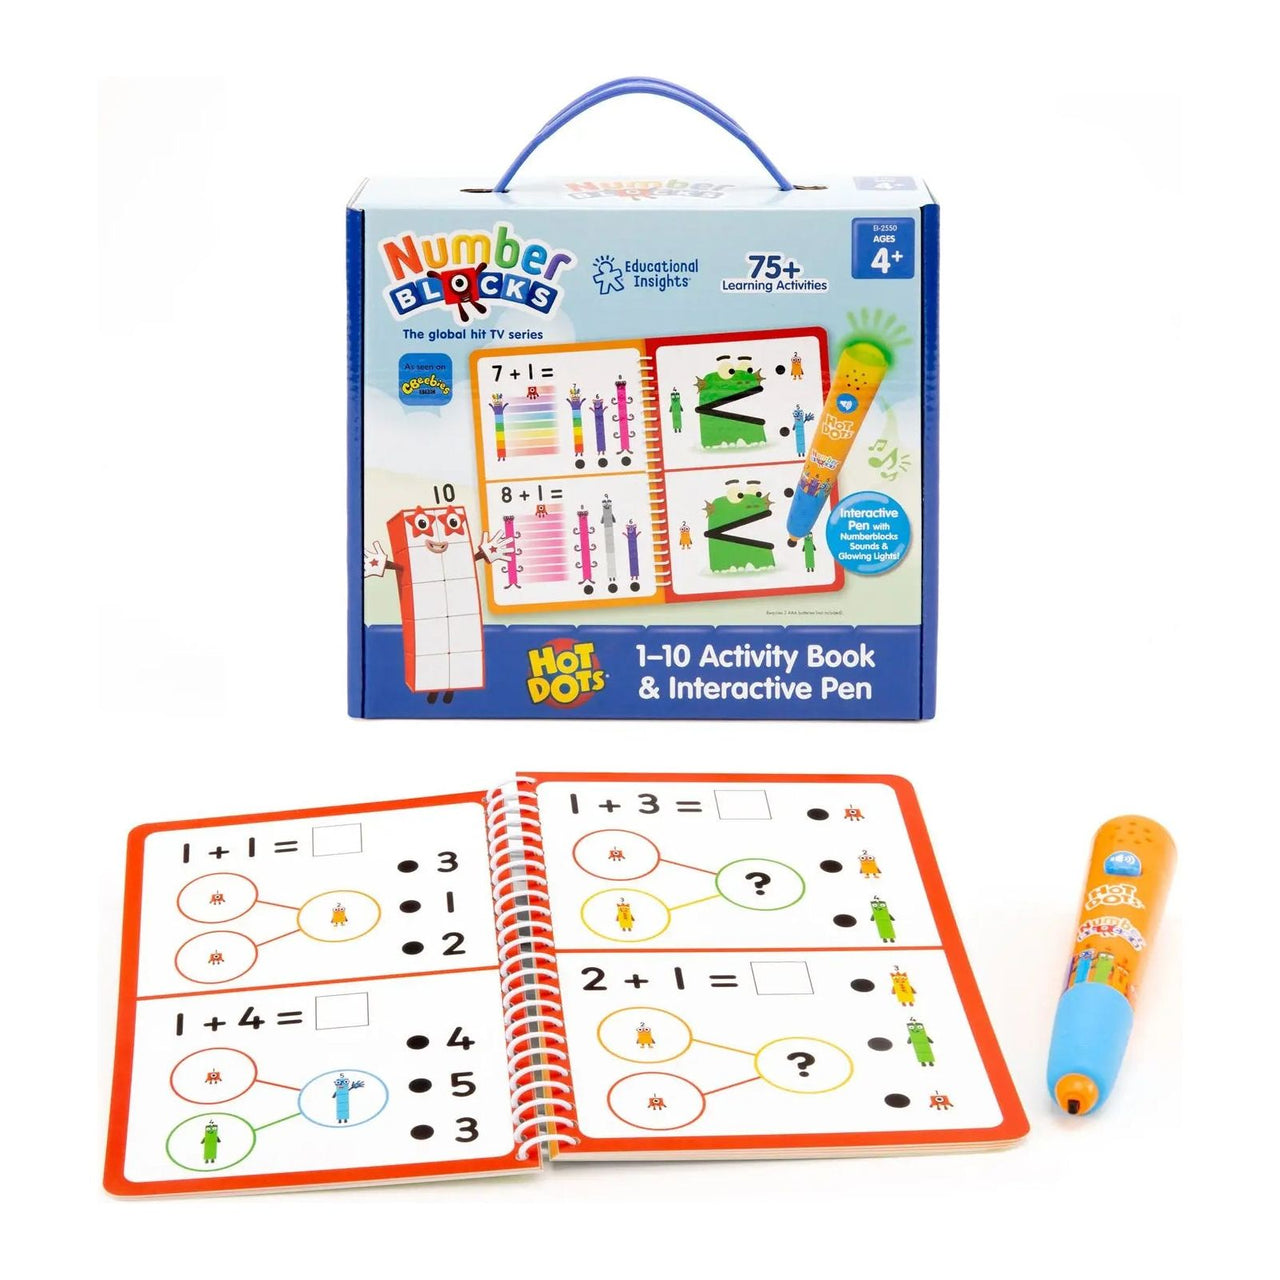 Numberblocks 1-10 Activity Book & Interactive Pen Learning Resources